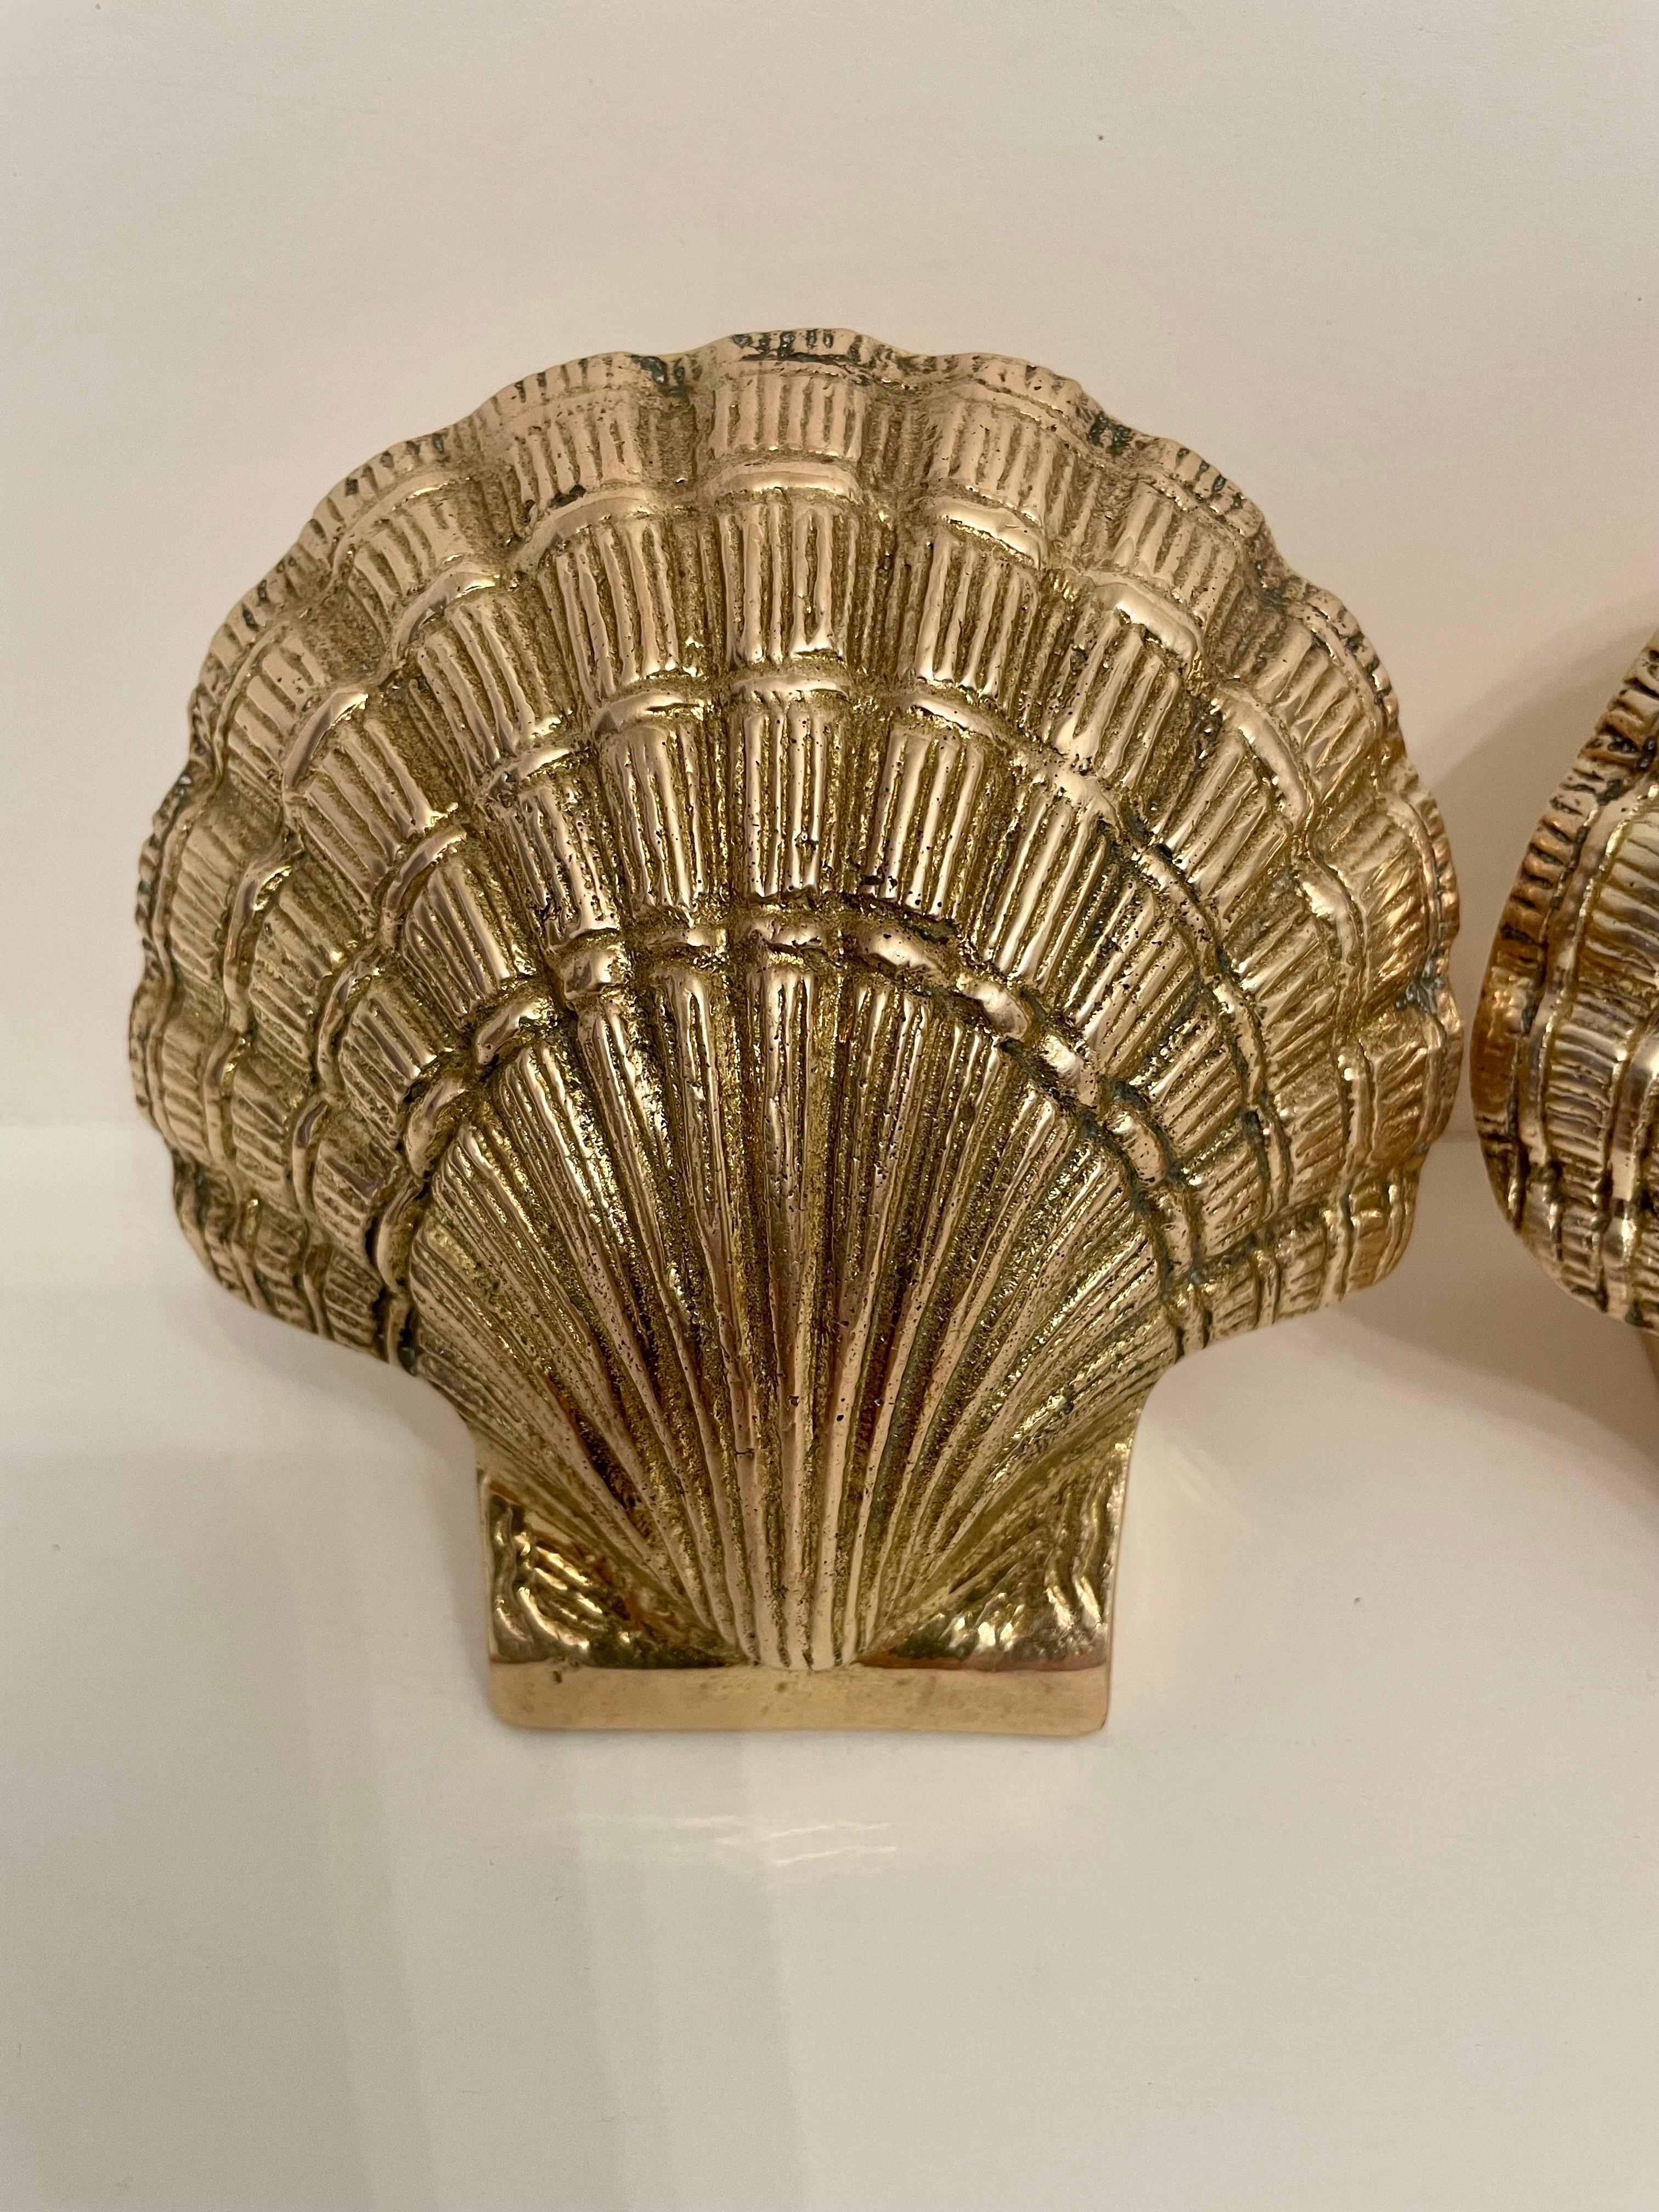 Hollywood Regency Pair Brass Scallop Or Clam Shell Seashell Bookends